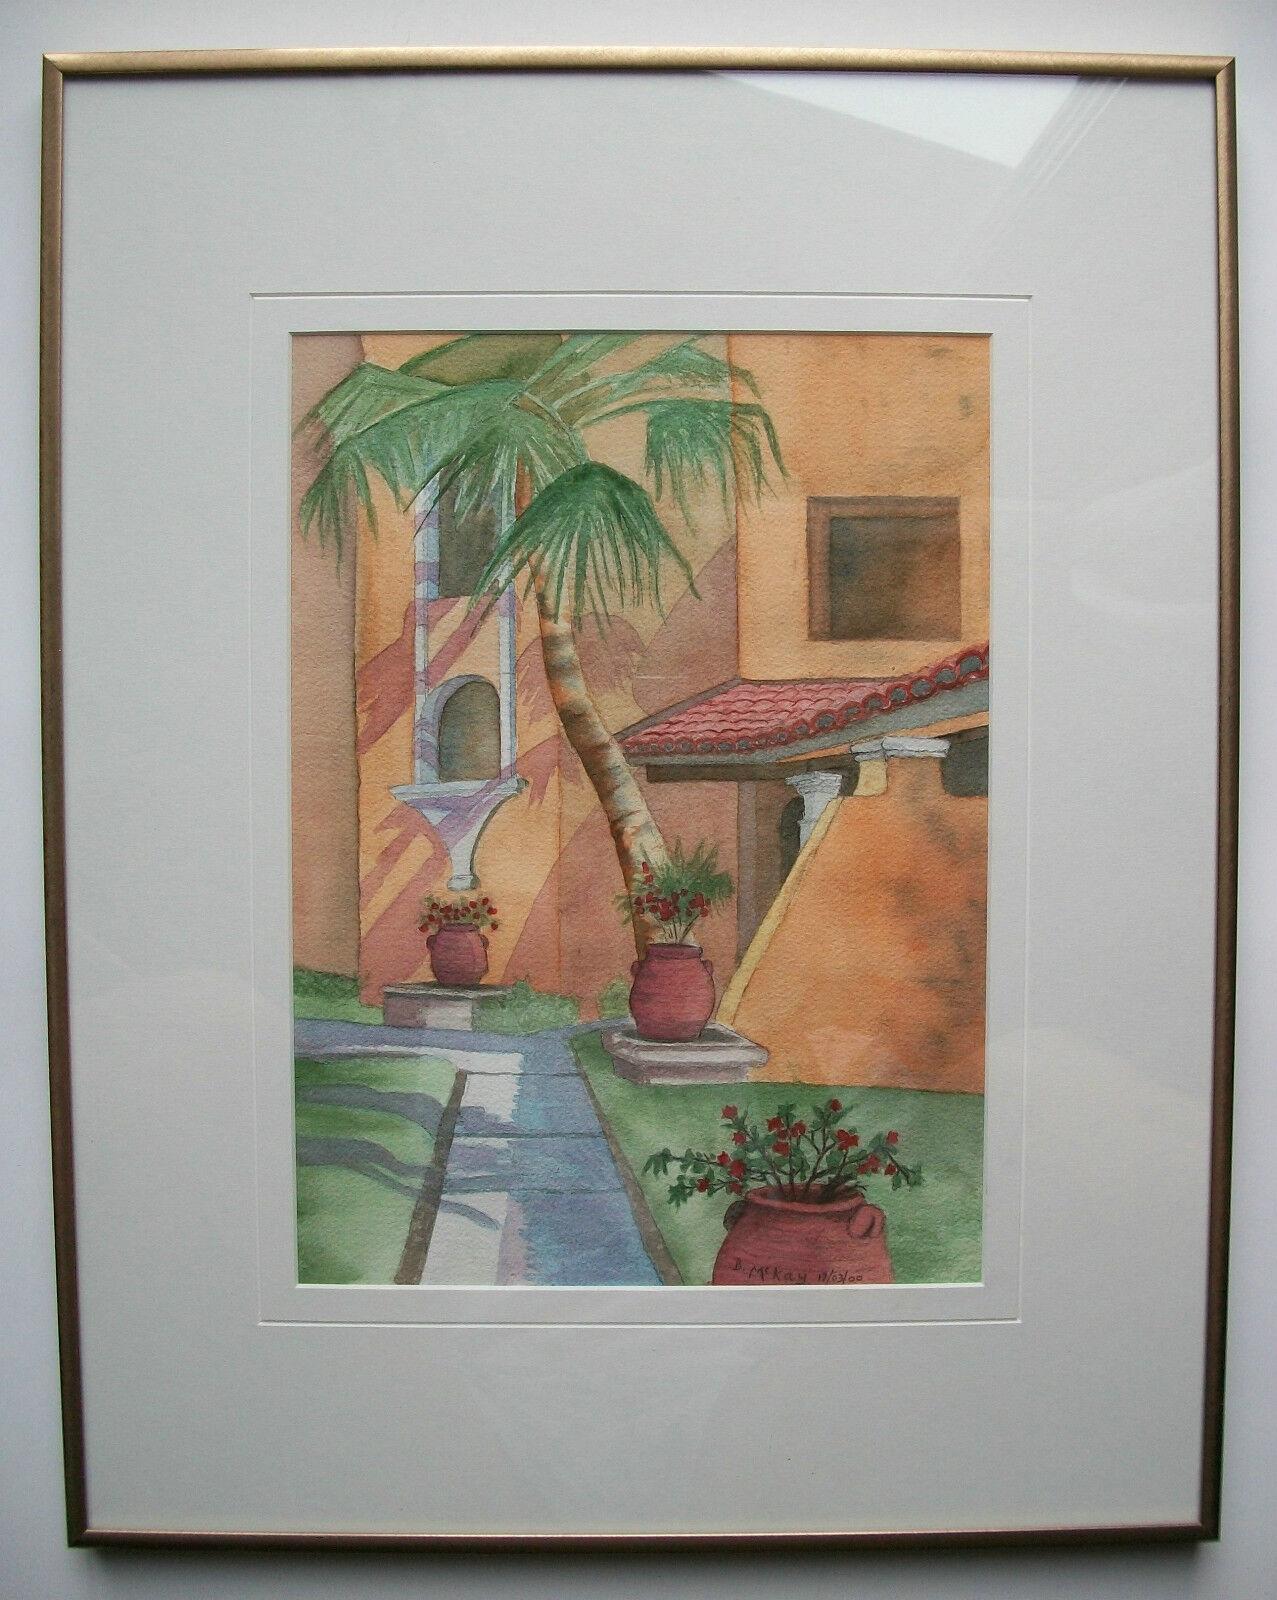 Metal B. McKay, 'La Jolla', Framed Watercolor Painting, Signed & Dated, circa 2000 For Sale